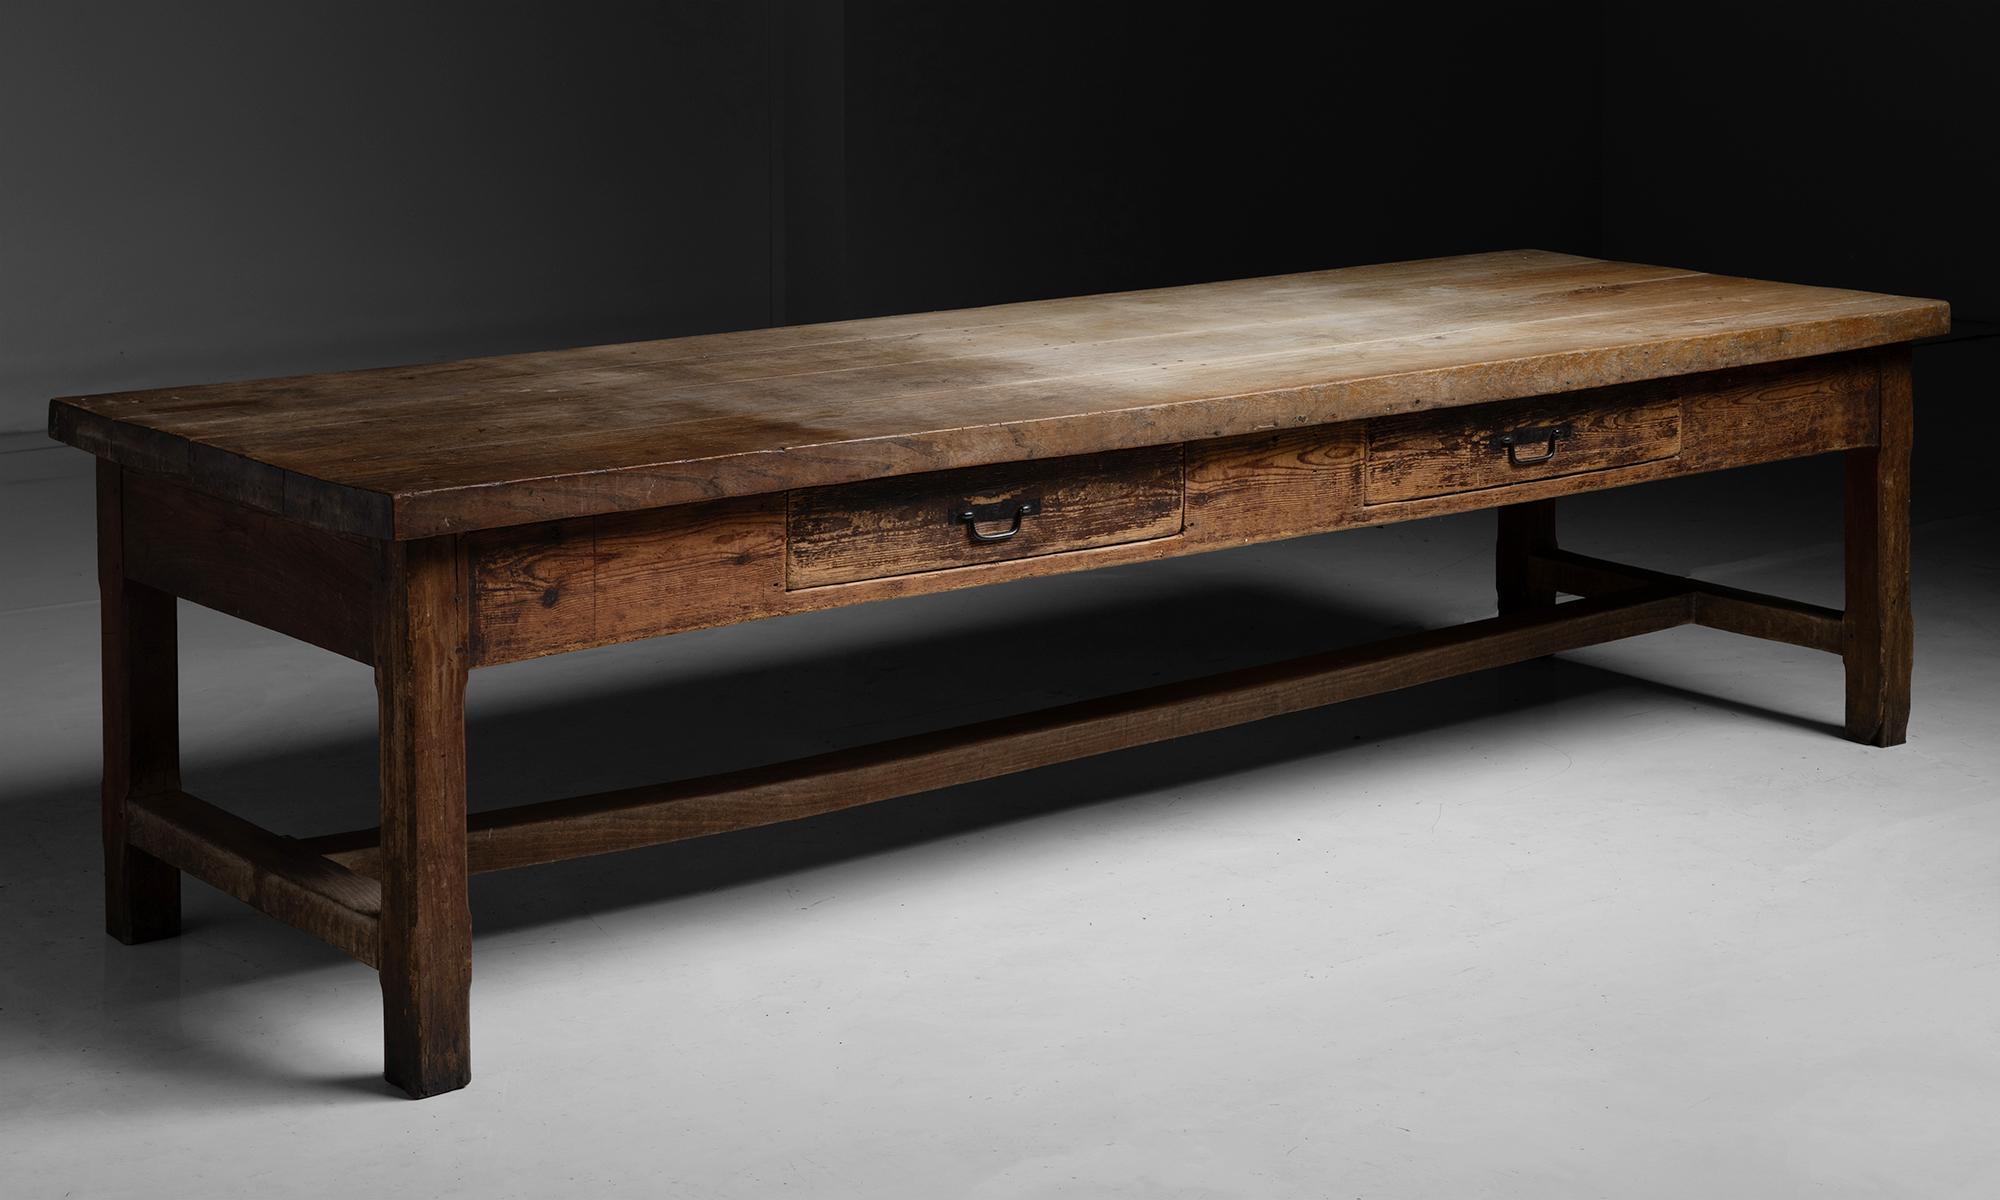 Elm & Pine Preparation Table

France Circa 1860

Pegged elm top on pine base with drawers.

Measures 119”L x 39.5”d x 30”h